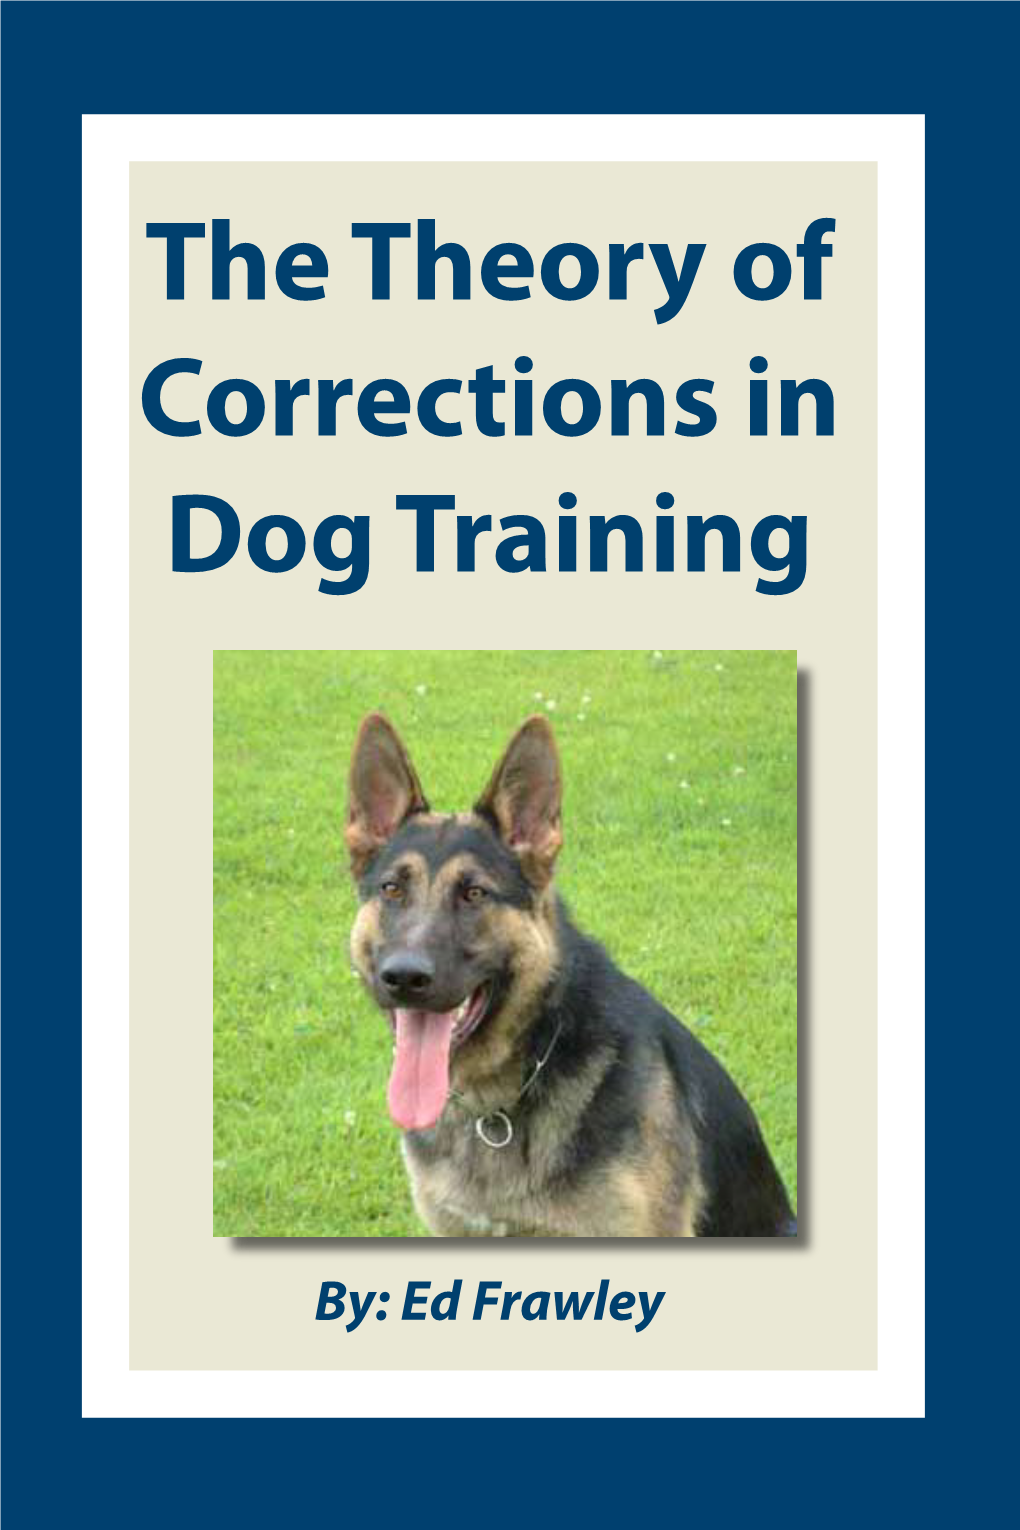 The Theory of Corrections in Dog Training